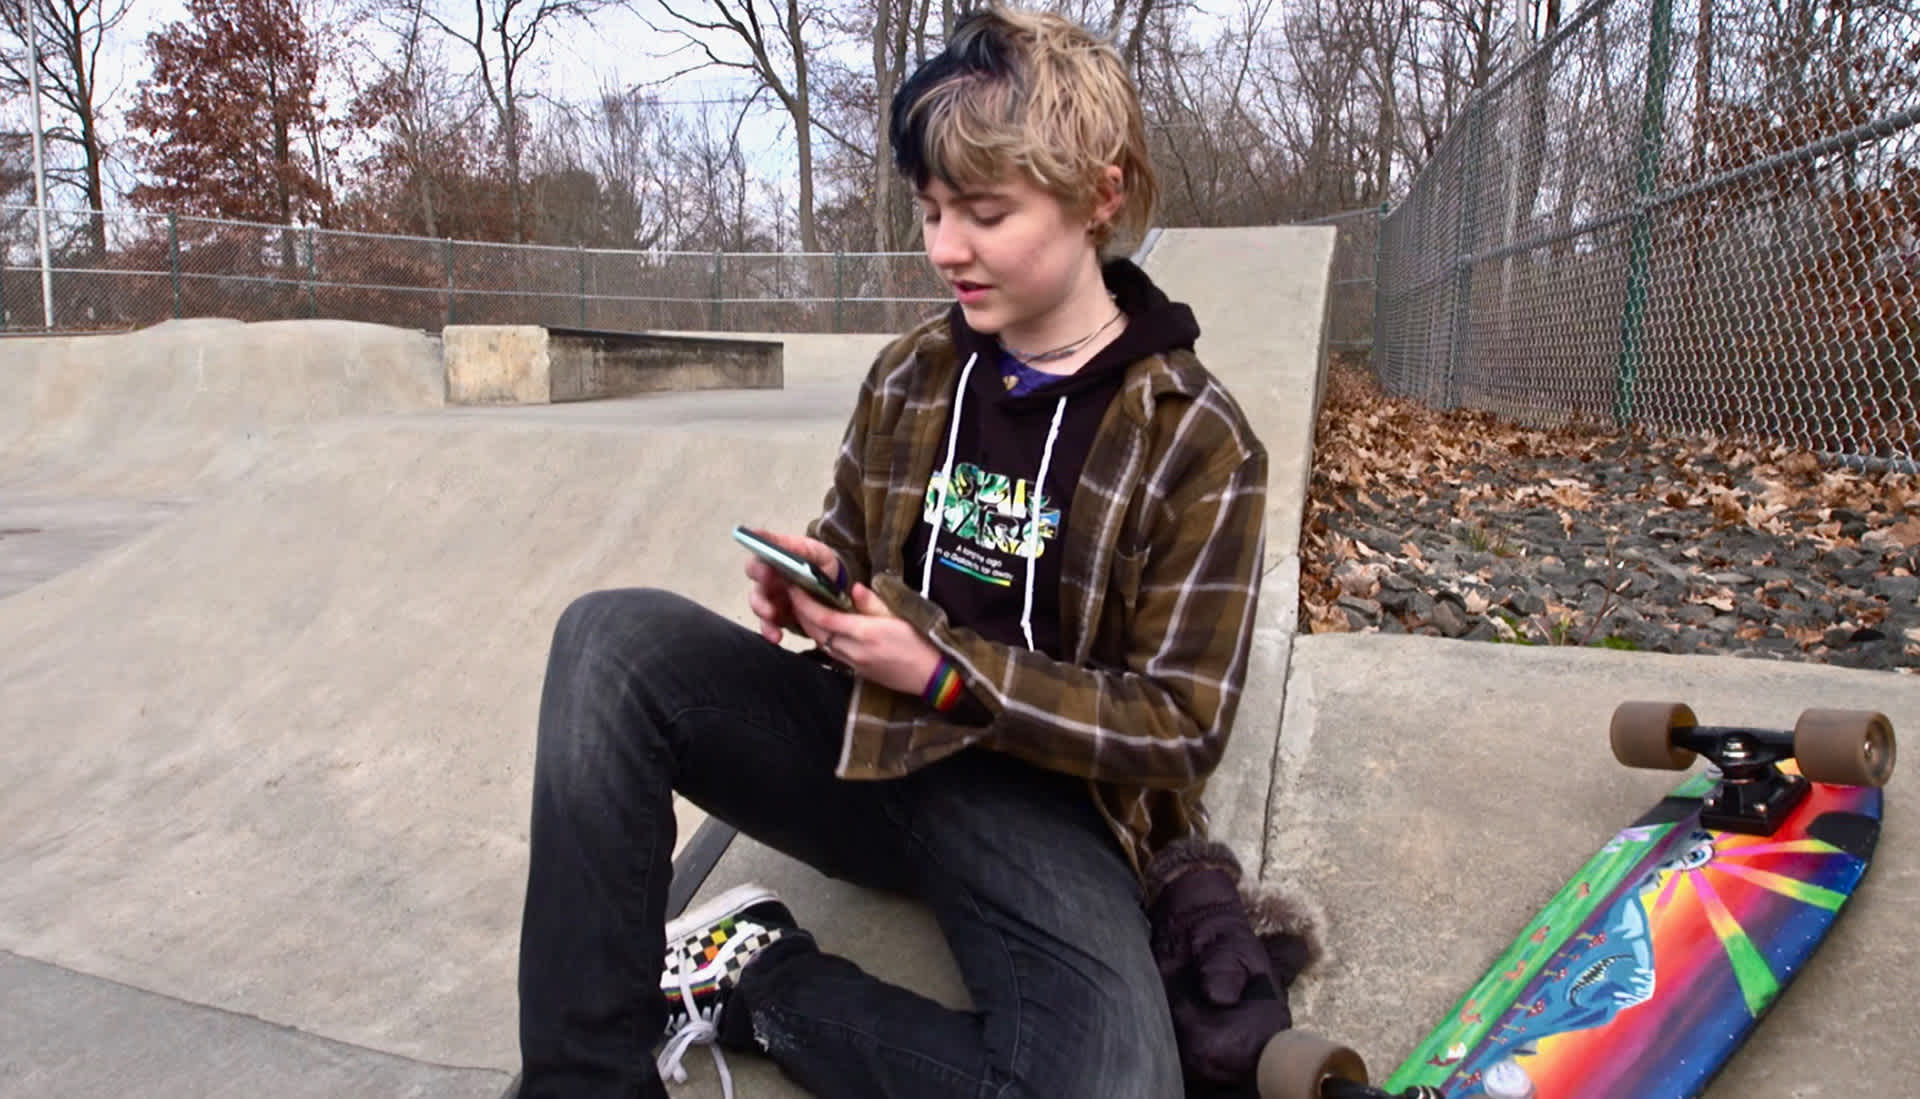 Gabby sits in the skatepark on her phone